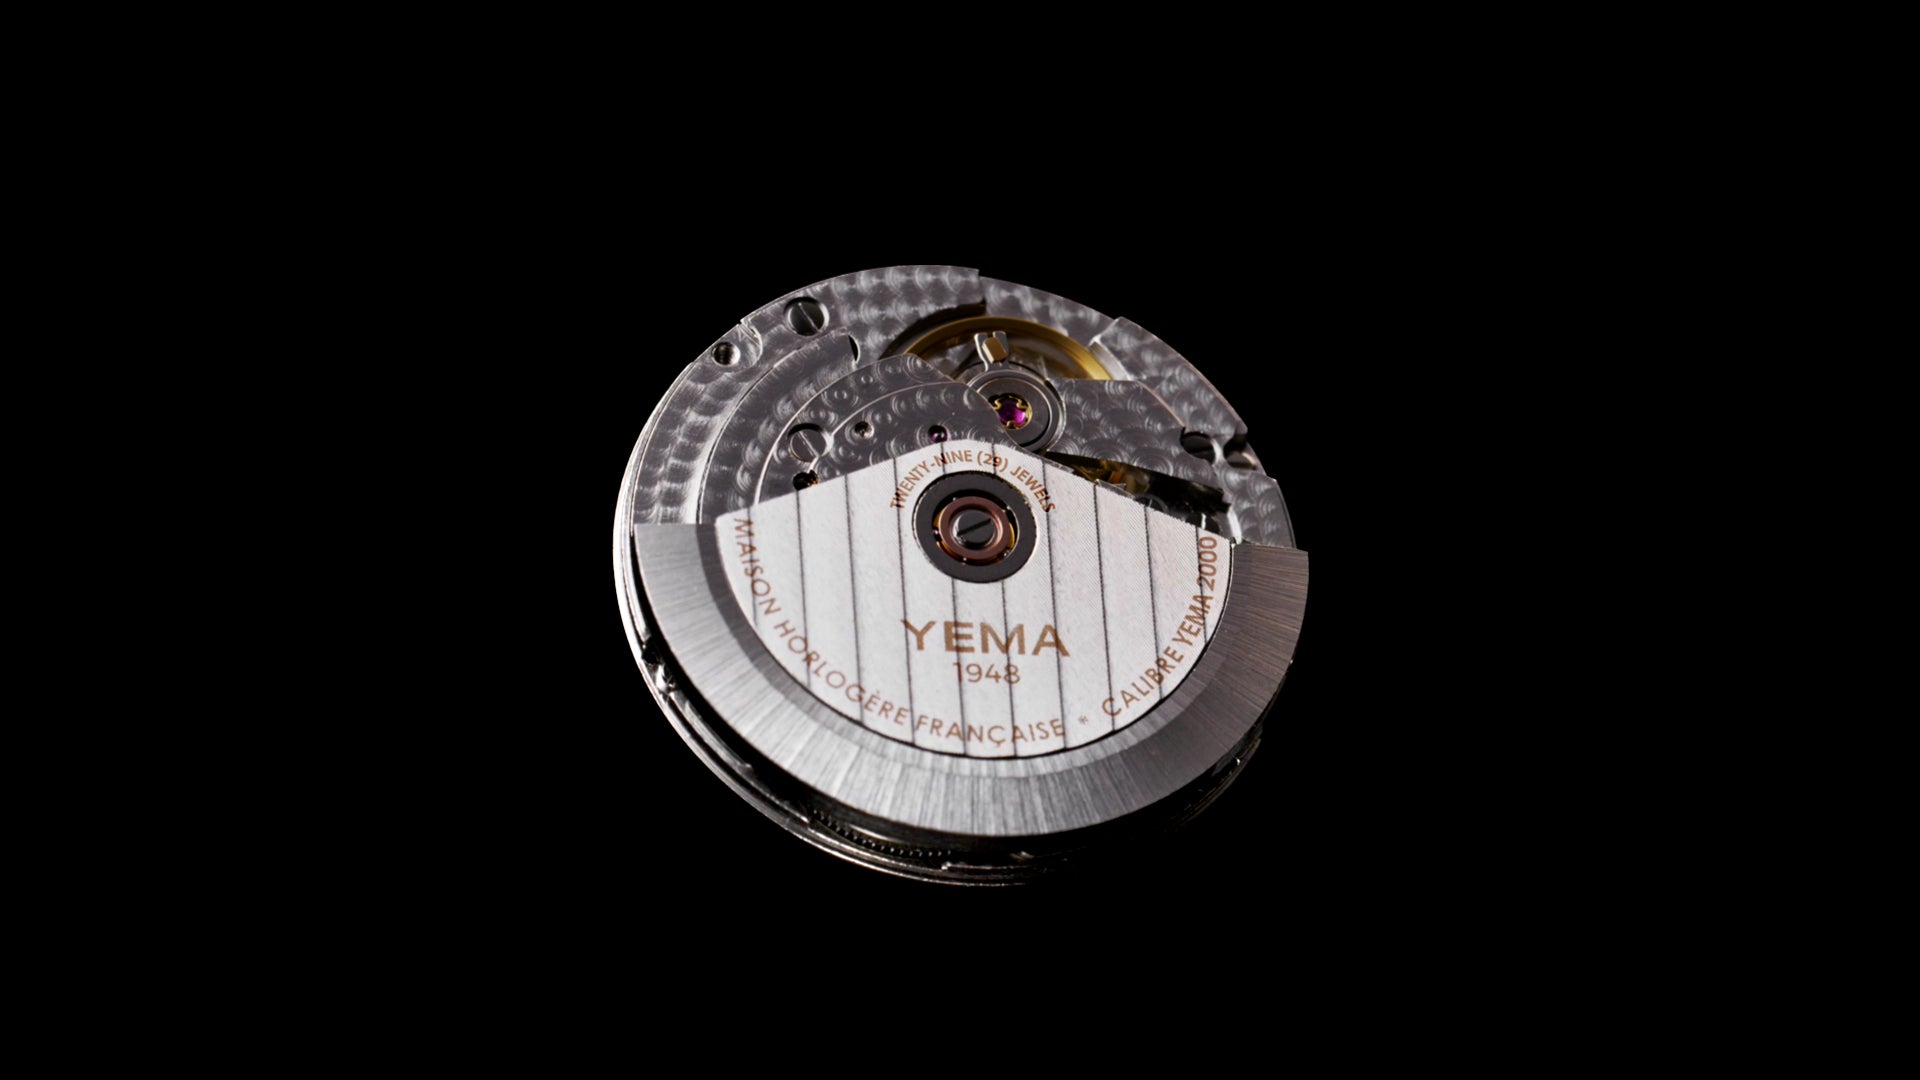 YEMA2000 In-house Caliber is now available!